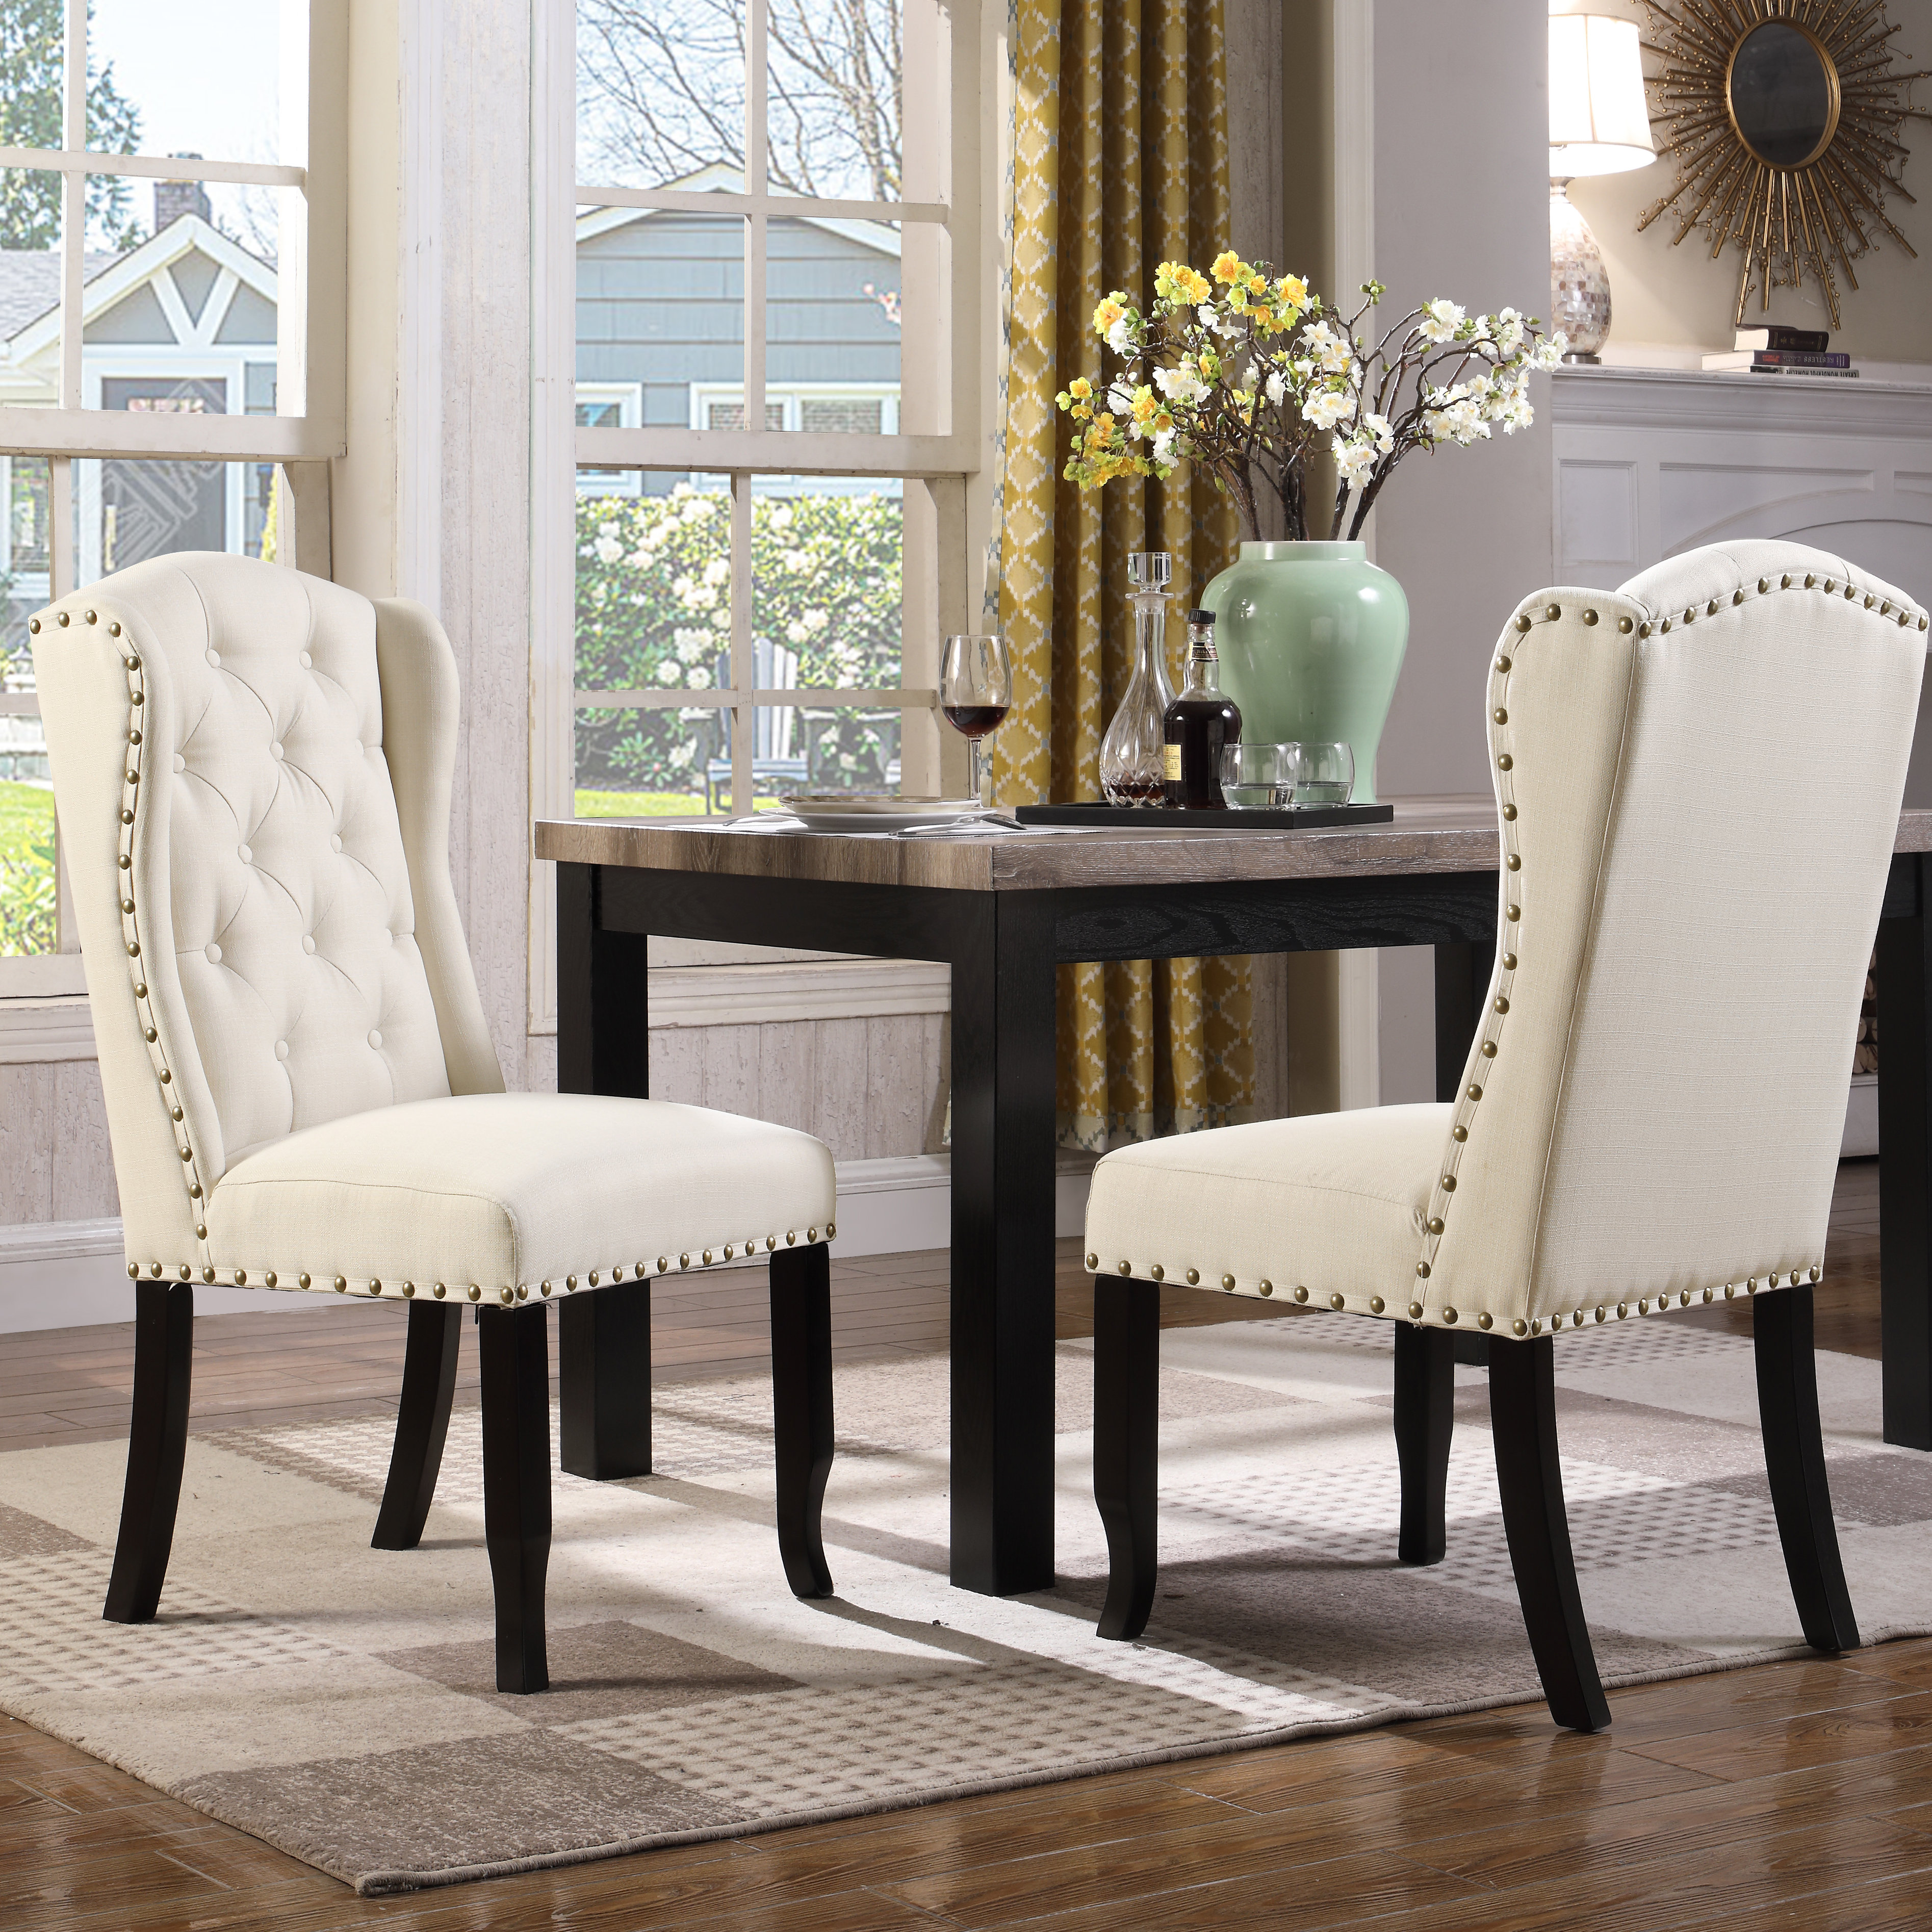 Darby Home Co Kareem Upholstered Dining Chair Reviews Wayfair